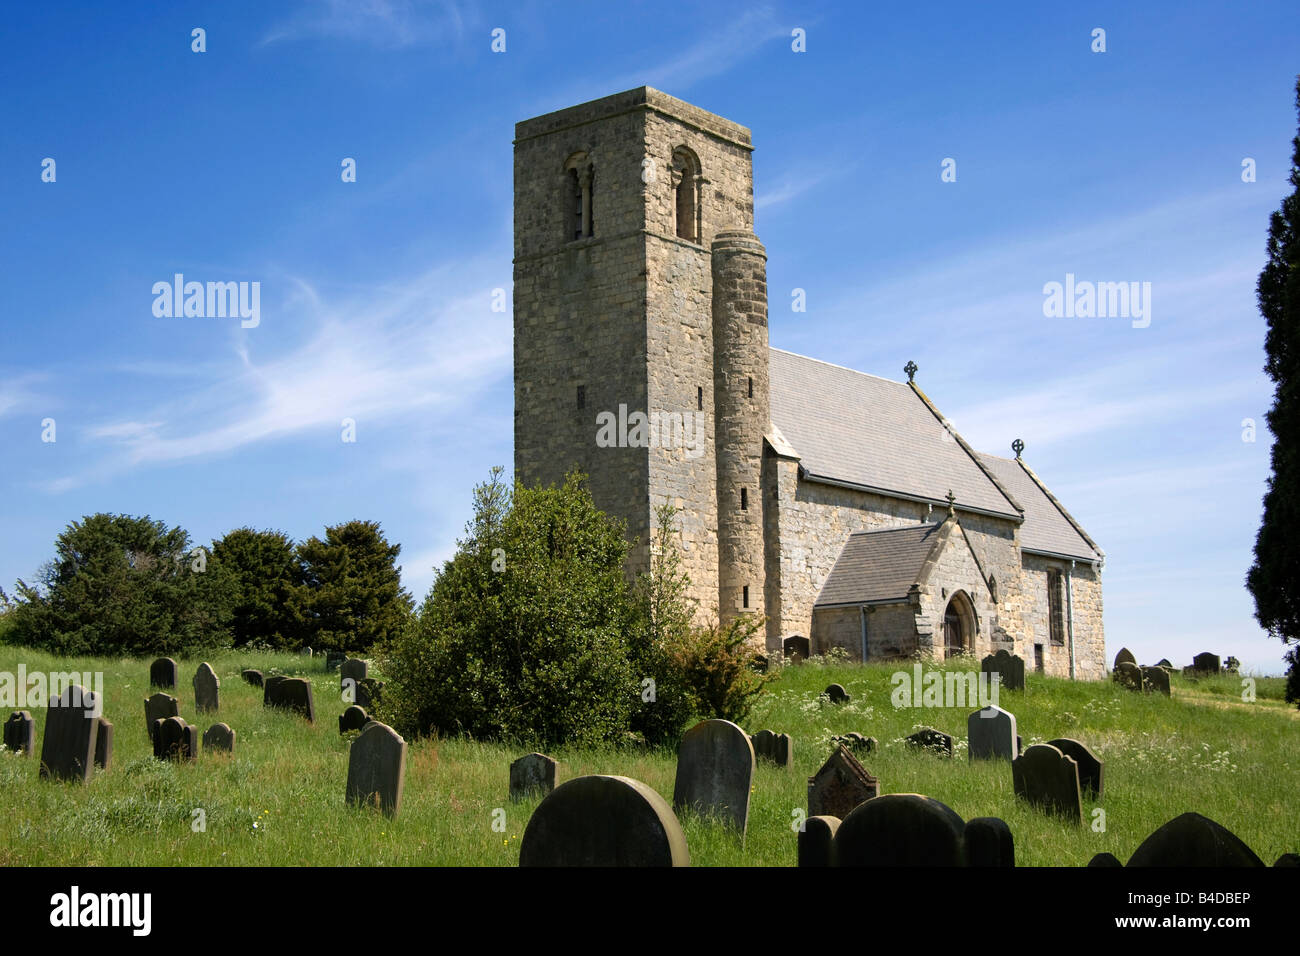 A country church and graveyard Stock Photo